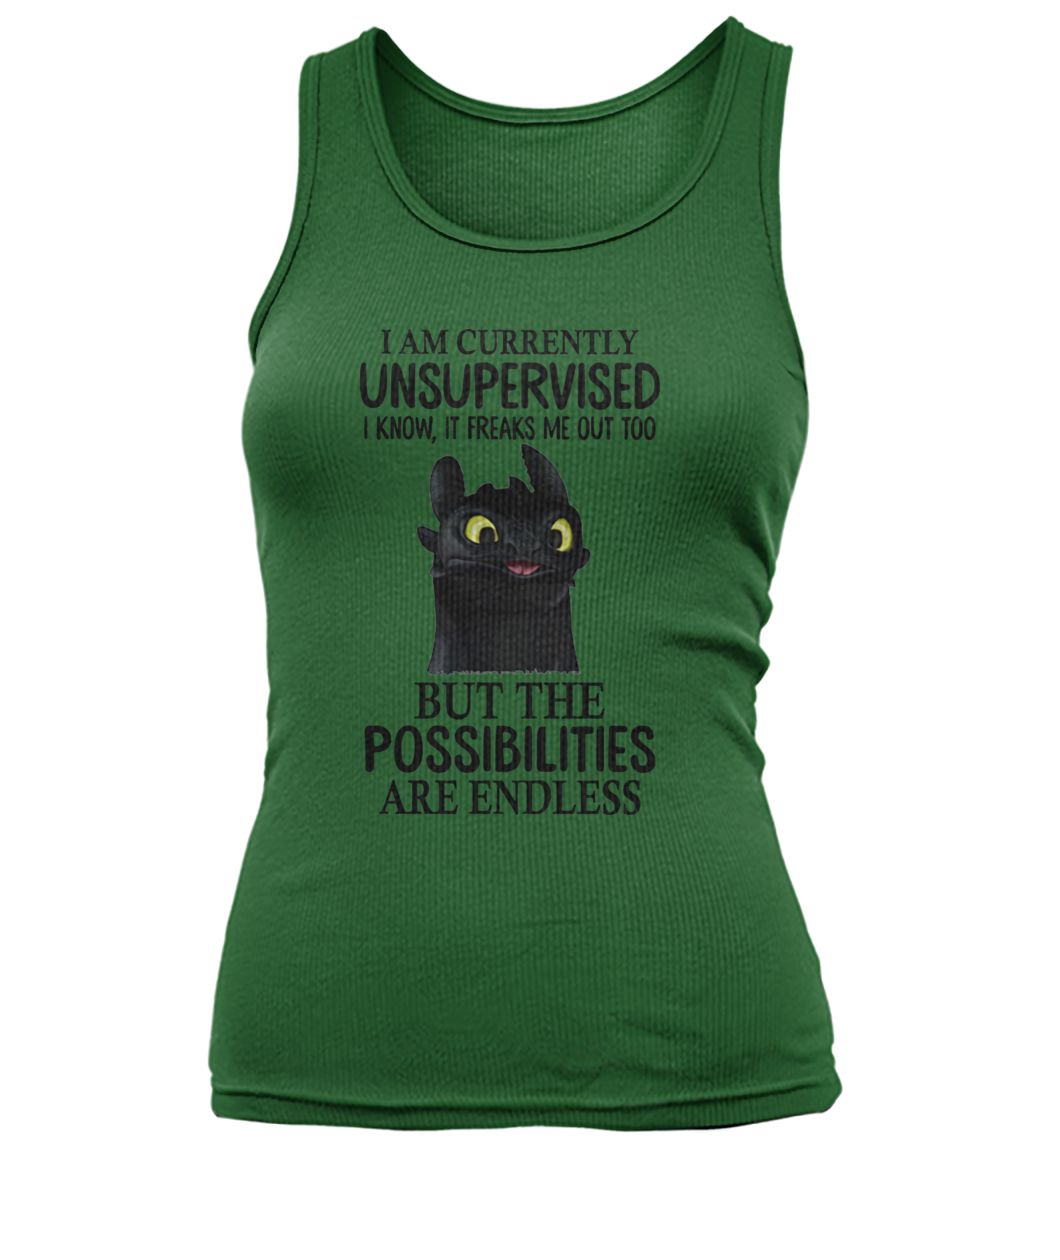 Toothless I am currently unsupervised I know it freaks me out too but the possibilities are endless women's tank top